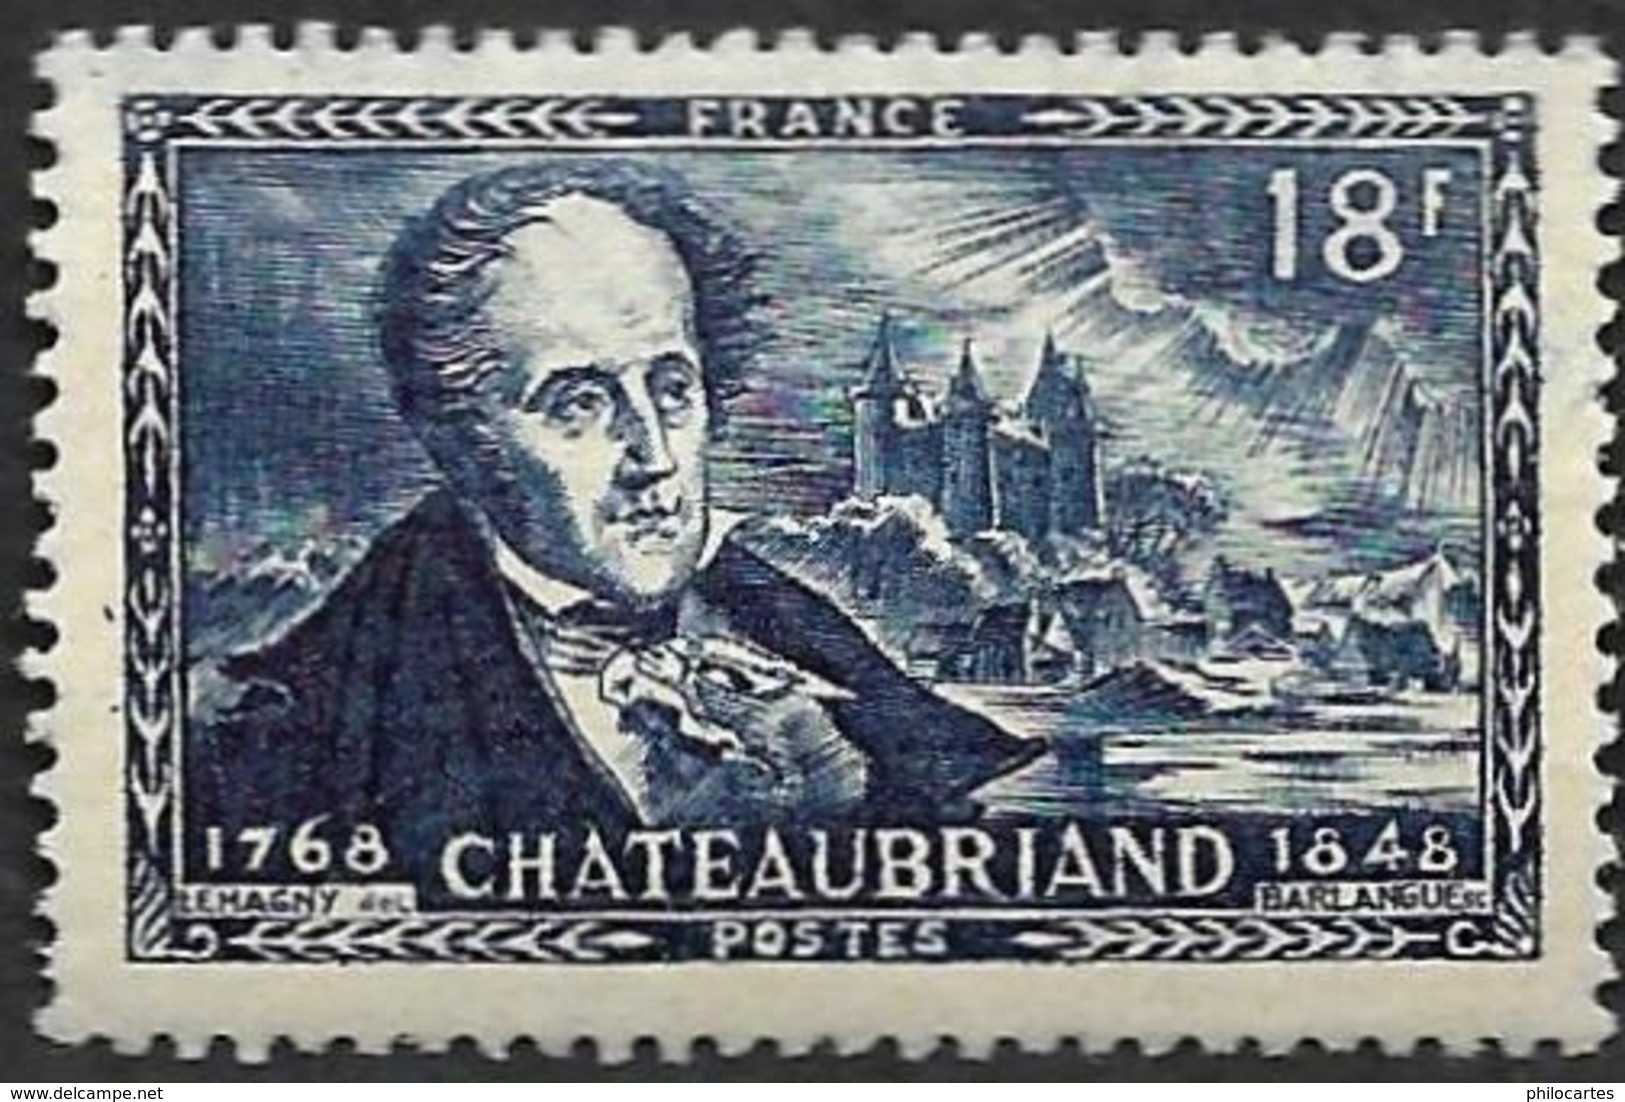 FRANCE  1948  -  Y&T  816 -  Chateaubriand   - NEUF** - Unused Stamps